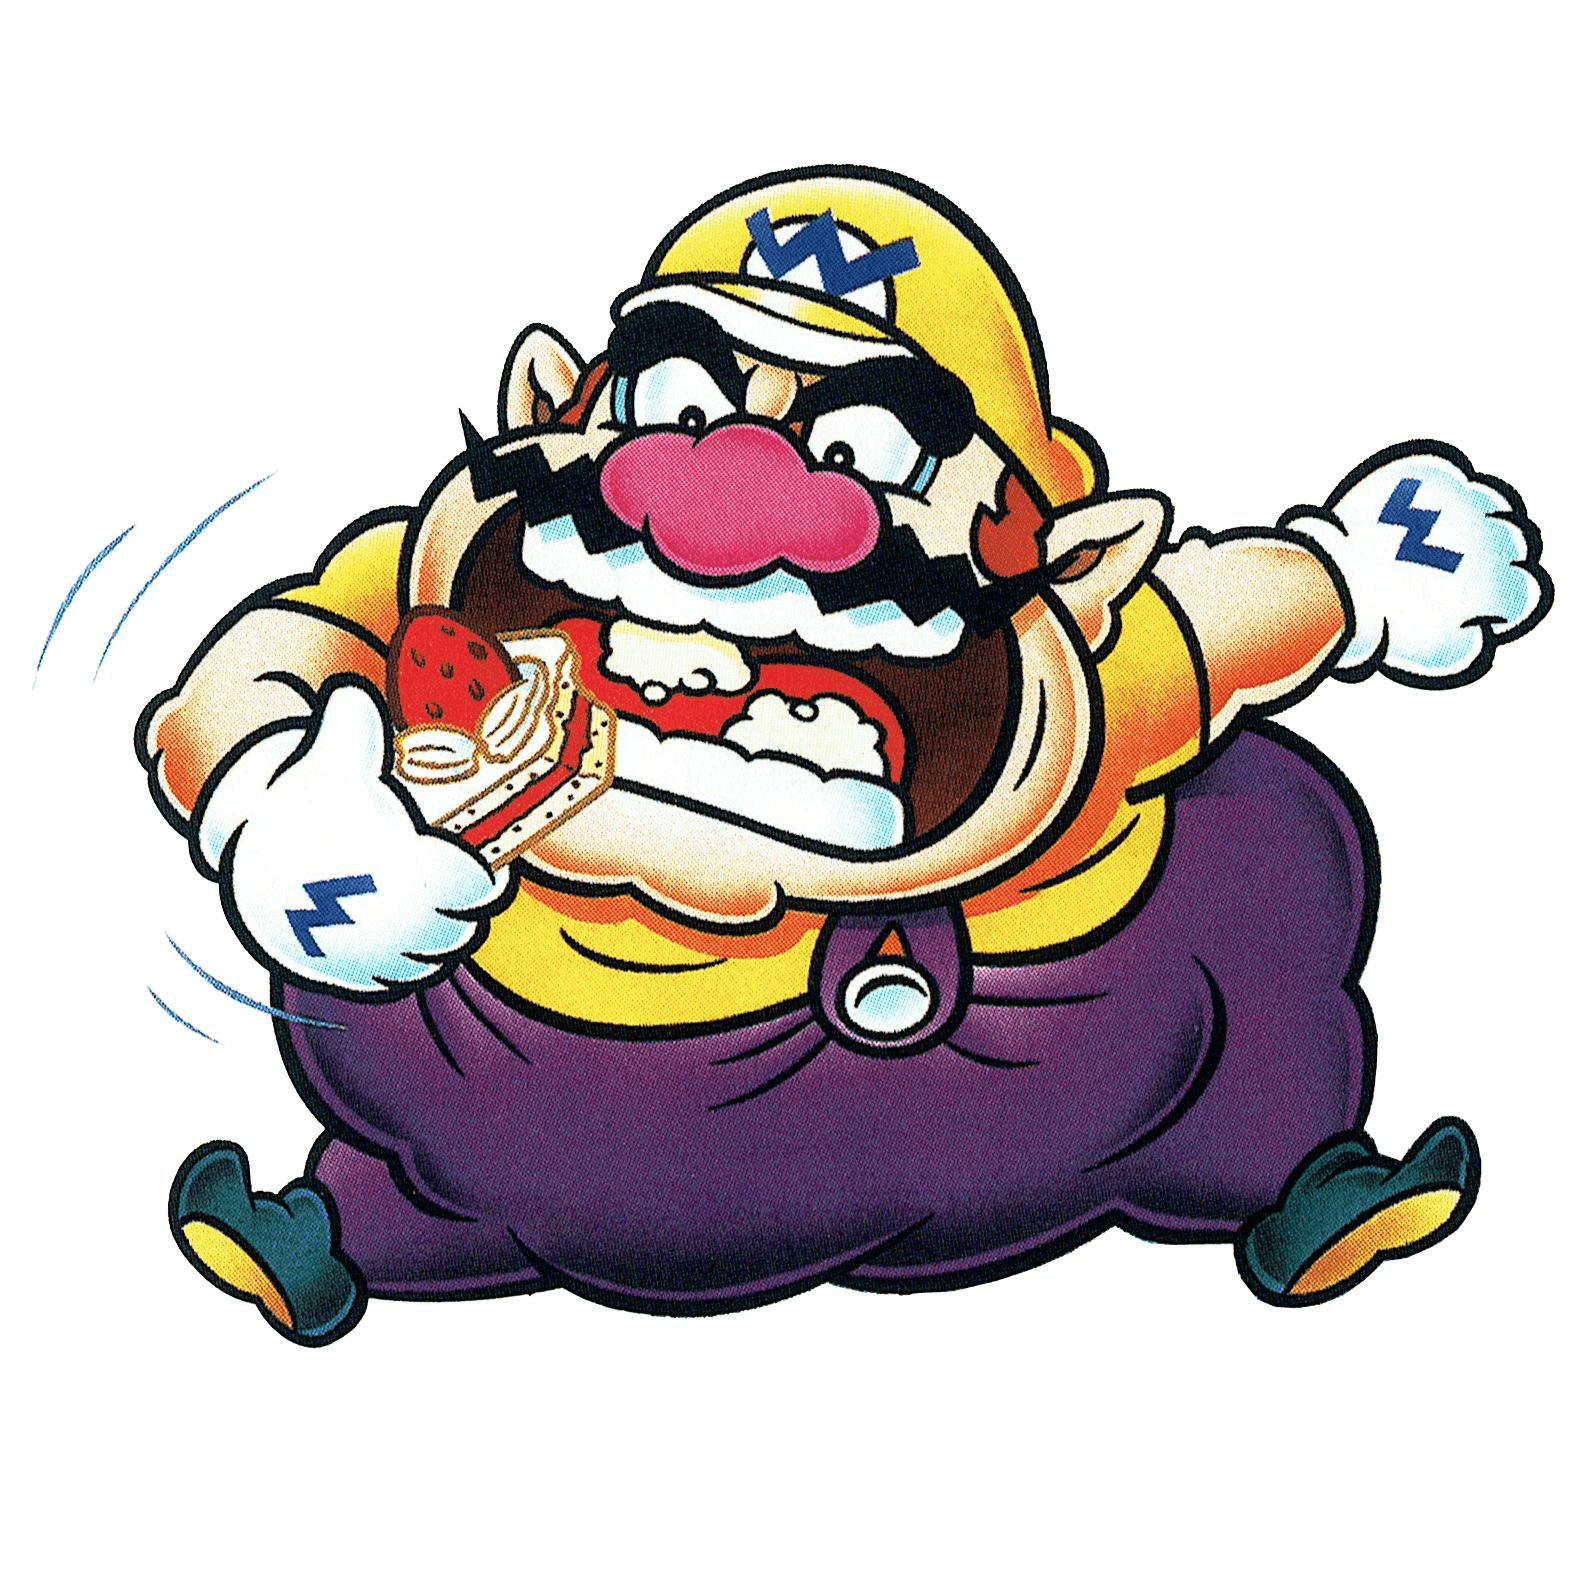 See? I told you the fattie ate my account! Good thing Wario had to get surgery because my account was poisened. I got it back! Also, once Wario was released from the hospital he was arrested for unauthorized eating of Userpedia accounts! He was put in prison for a month, and sentenced to not being able to eat a thing for a week! Now were even!